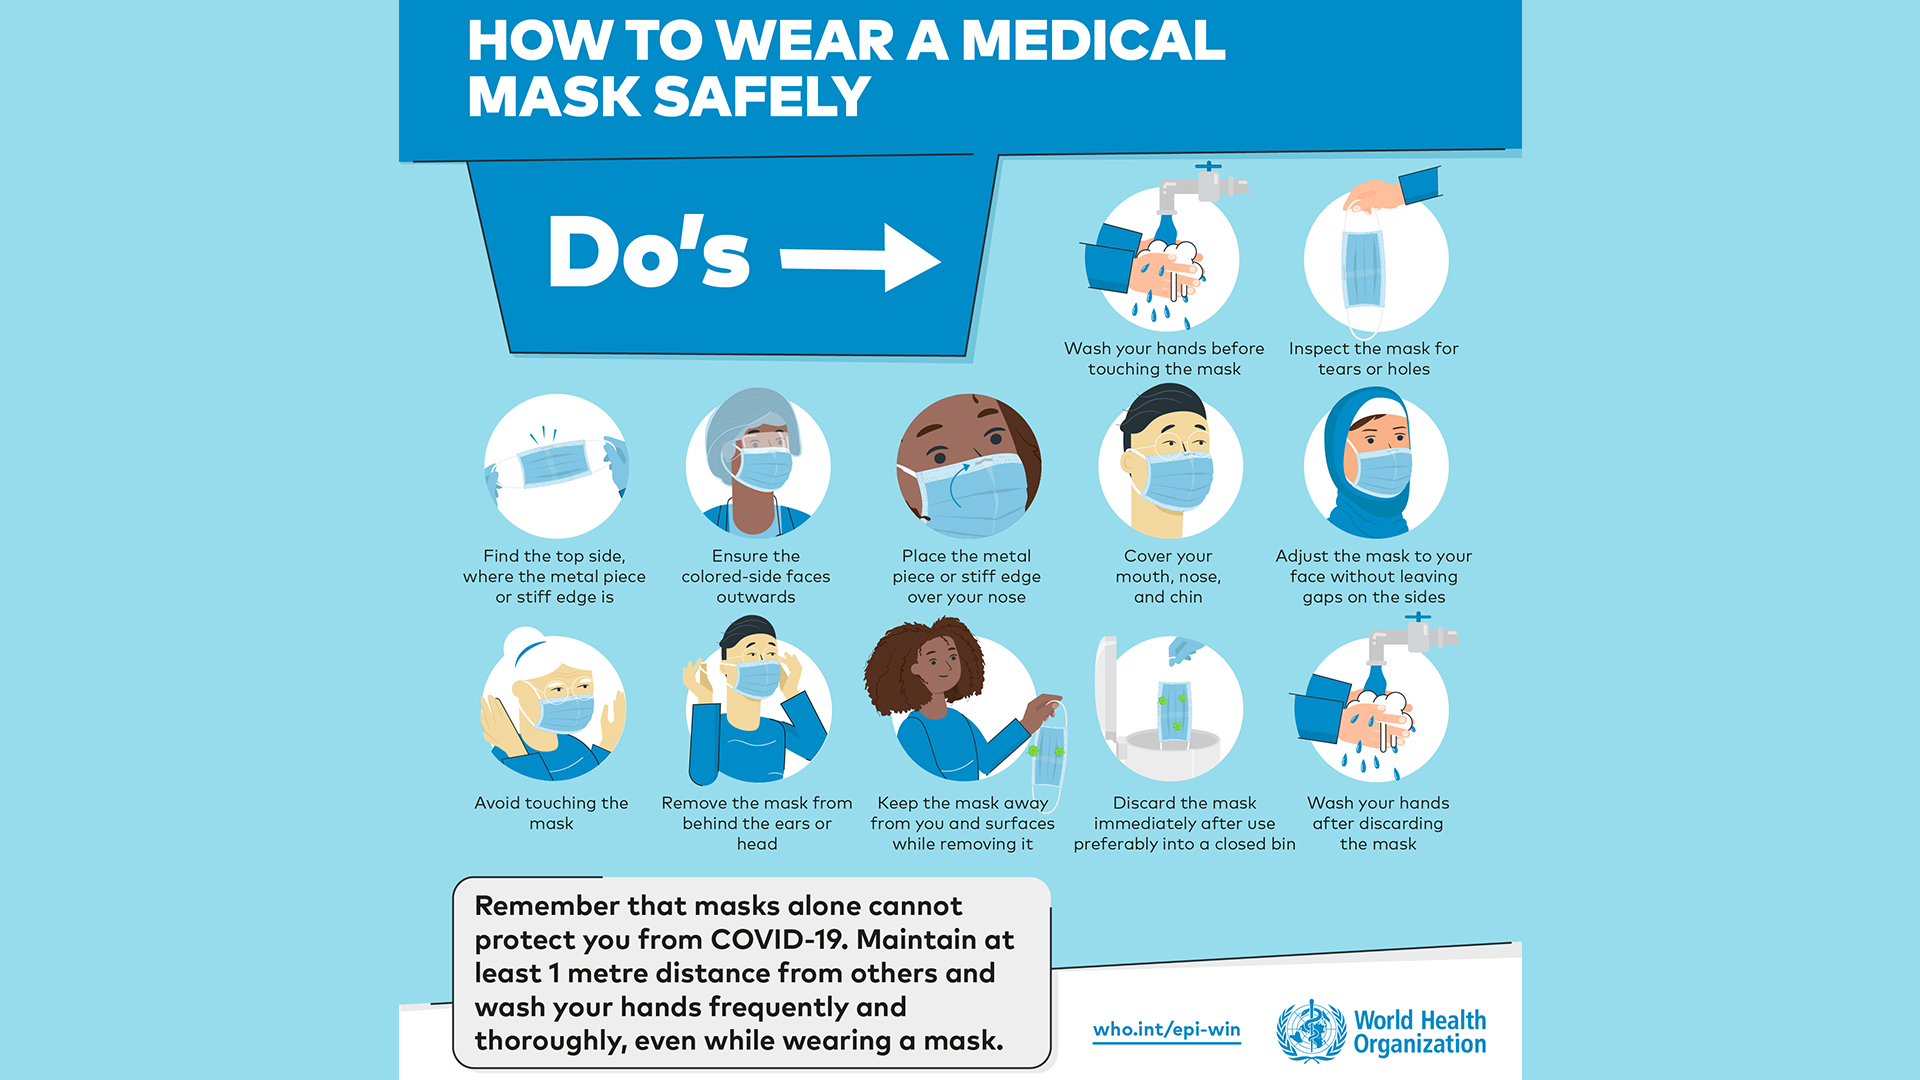 New rules on wearing masks issued by the WHO